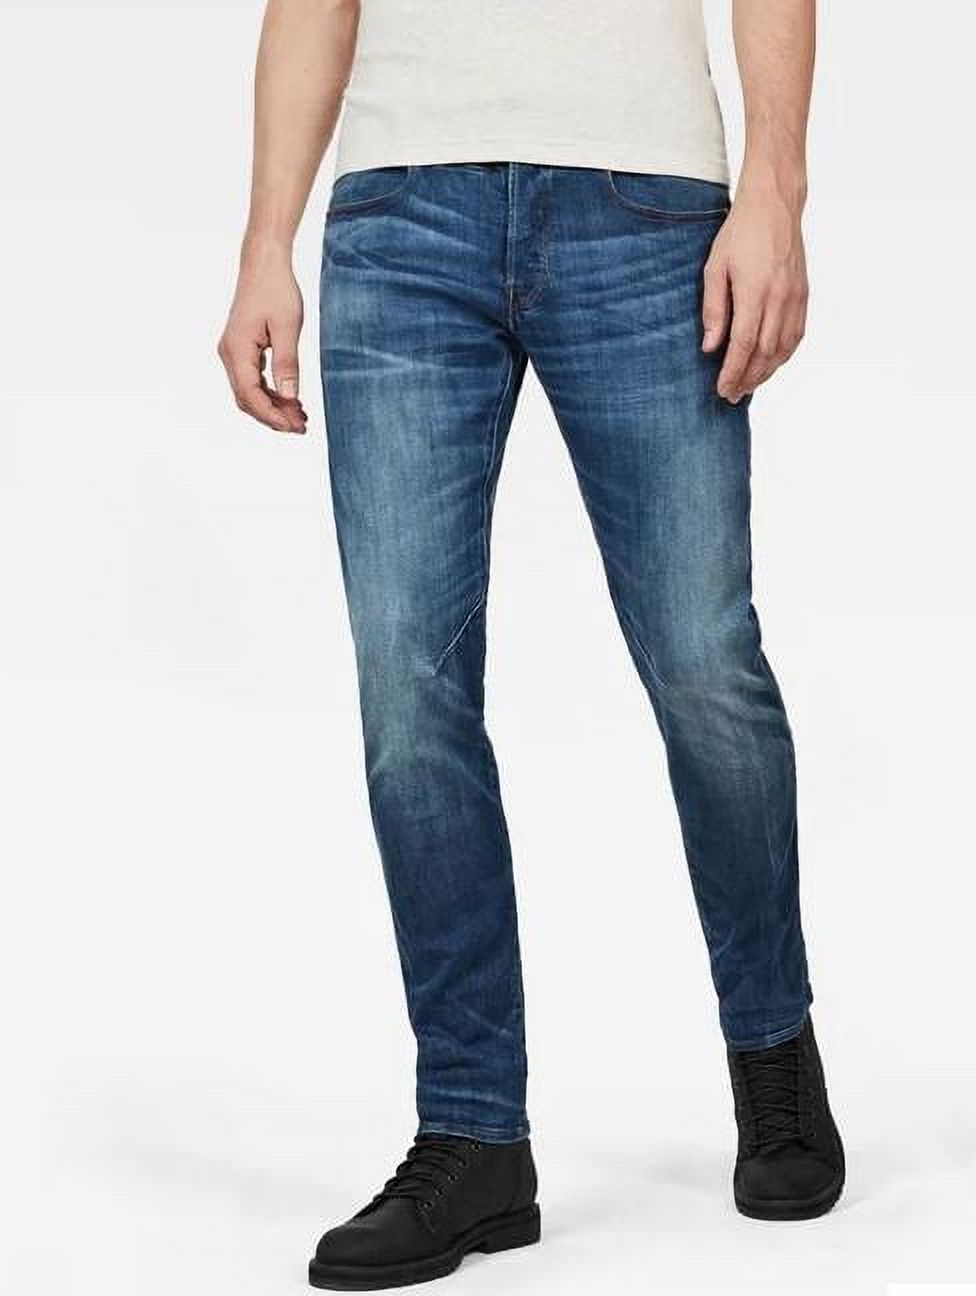 G-Star Raw Men's D-Staq 5 Pocket Tapered Slim Fit Jeans, Blue 34/32 - NEW - image 1 of 3